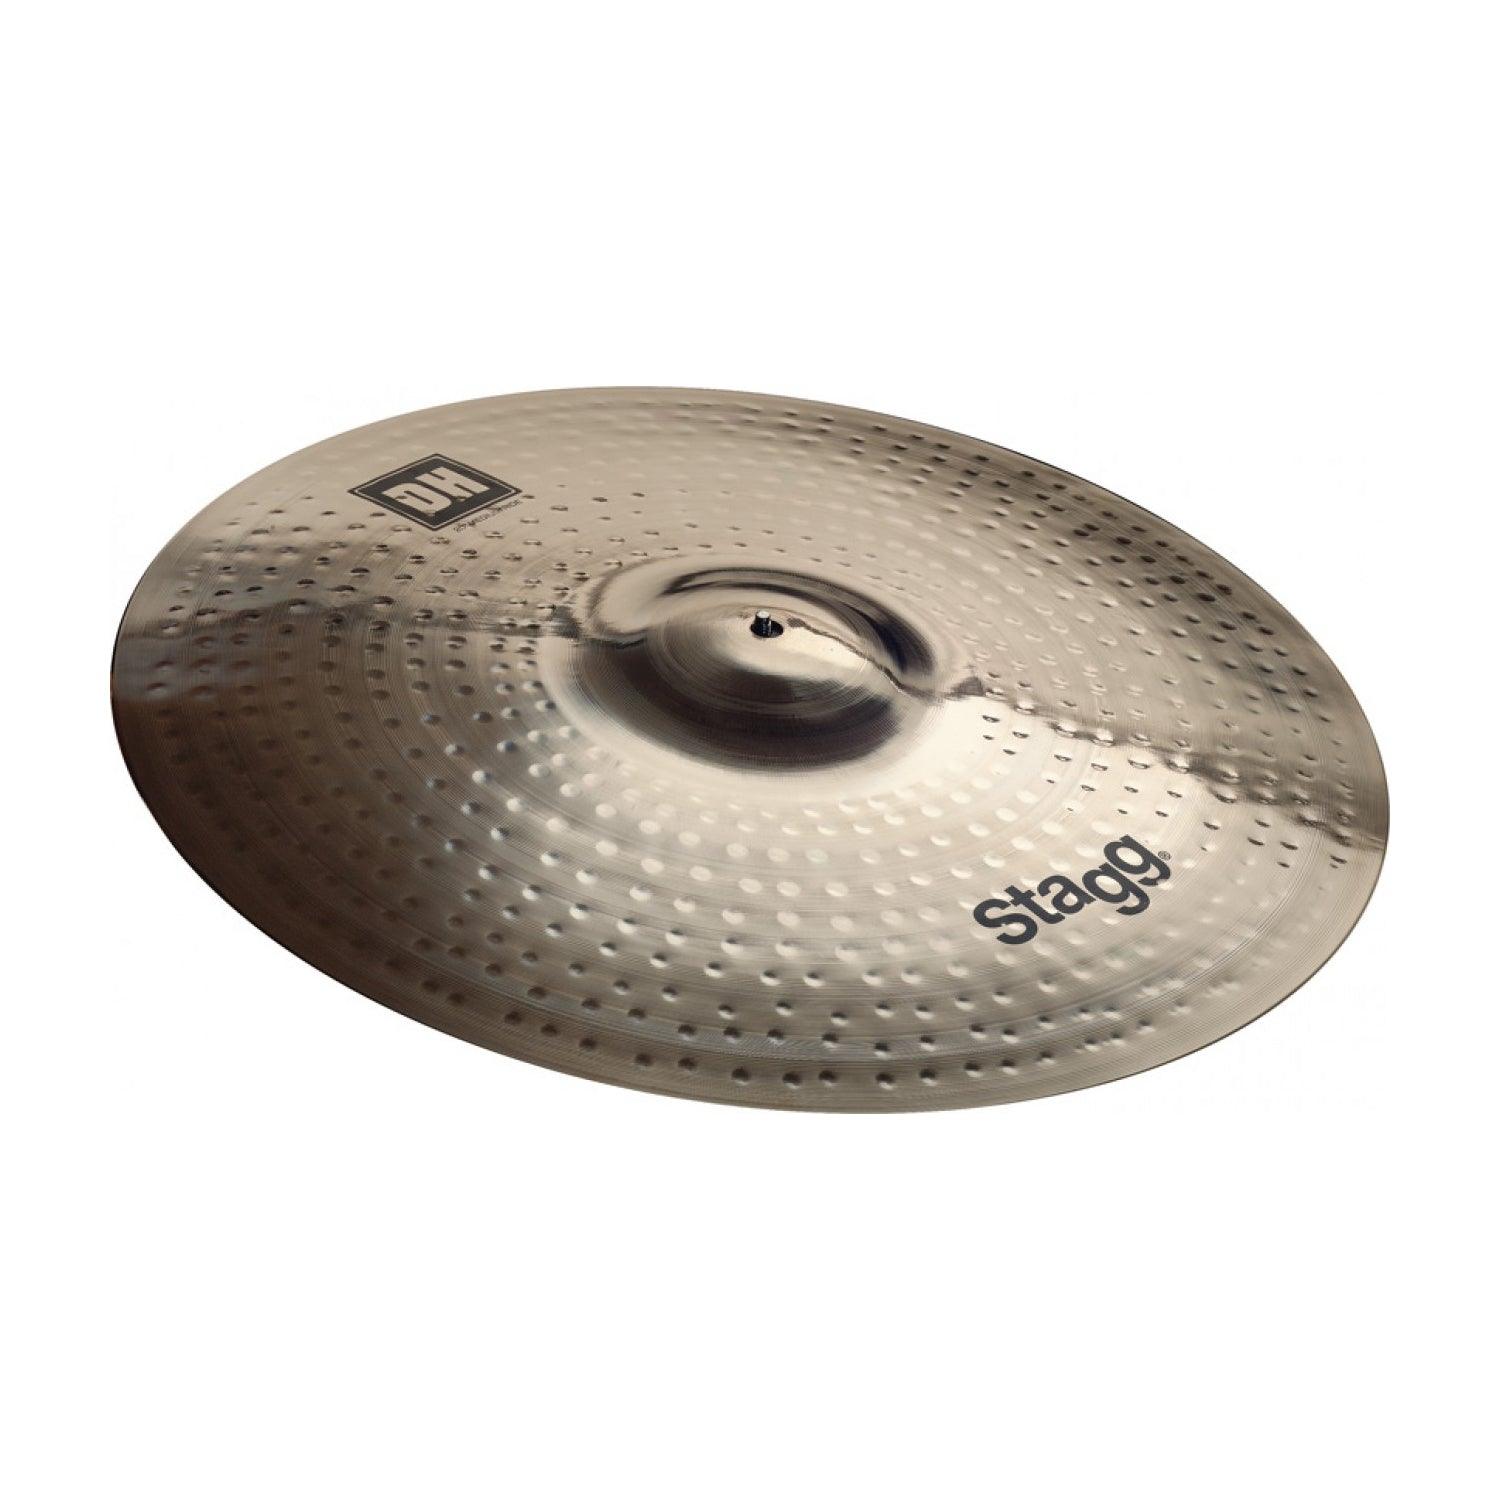 Stagg DH-RM20B Dual Hammered 20" DH Brilliant Medium Ride Cymbal - DY Pro Audio